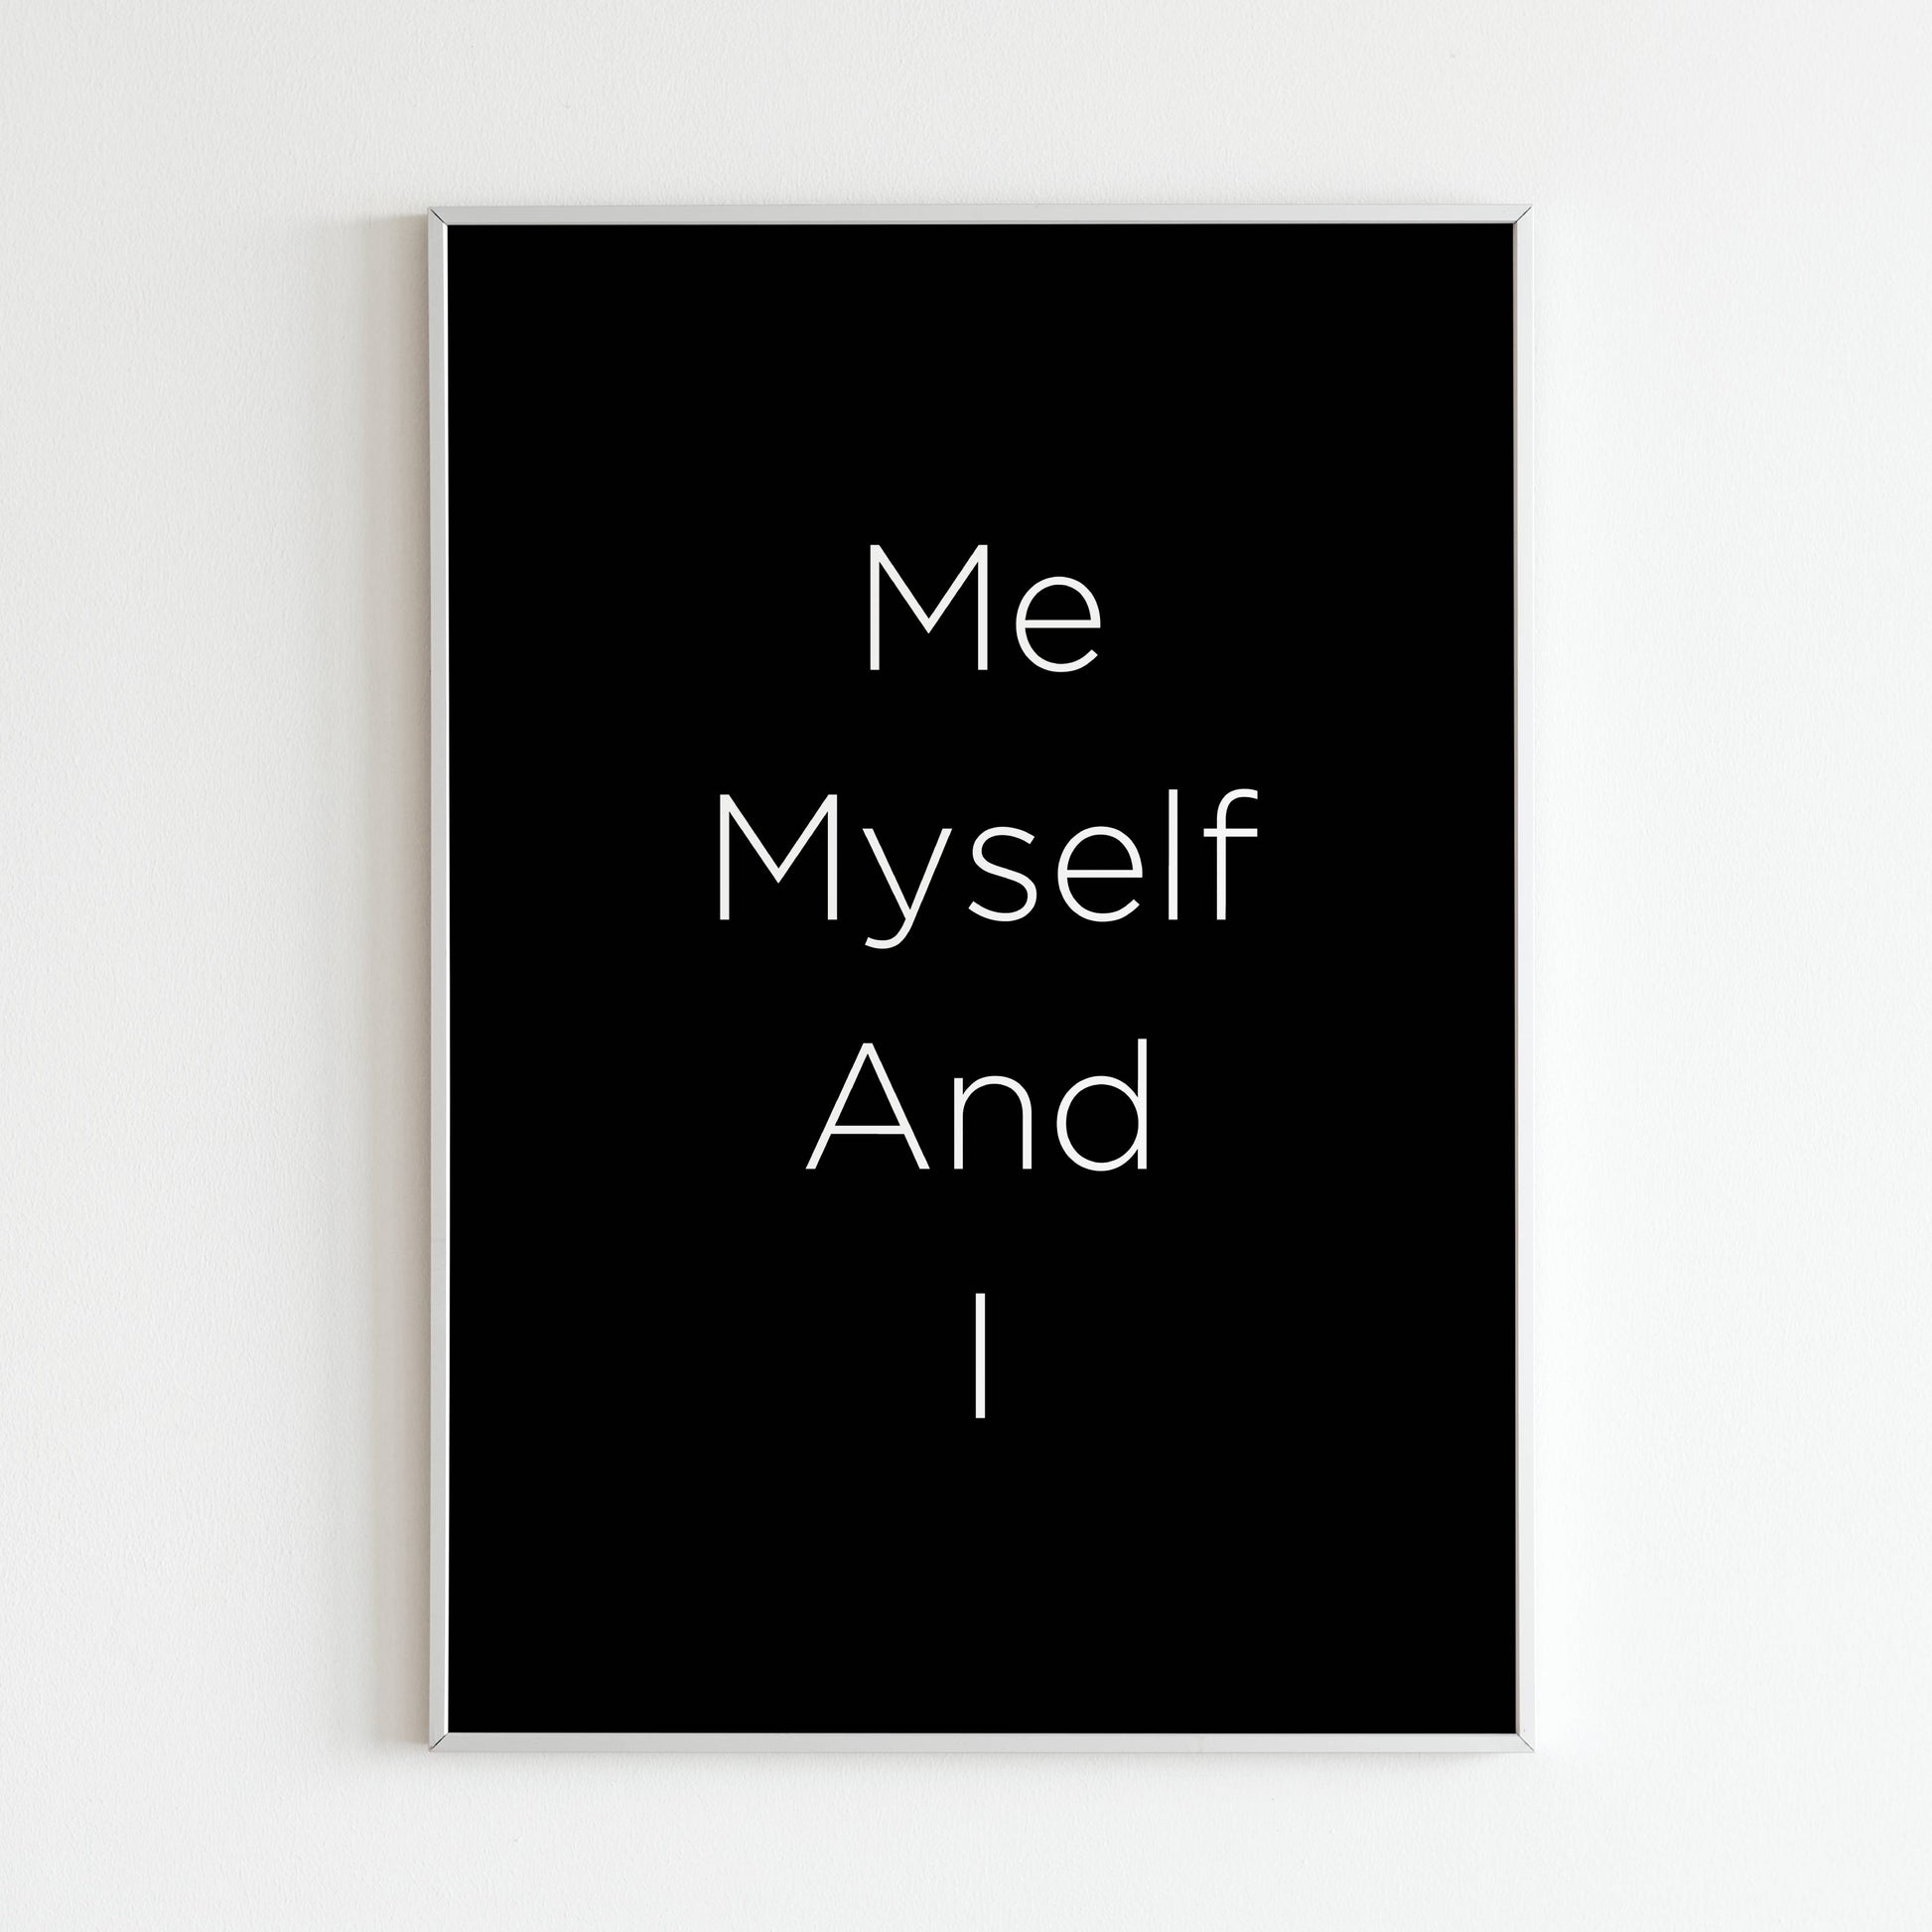 Downloadable "Me myself and I" wall art for a message of self-acceptance.